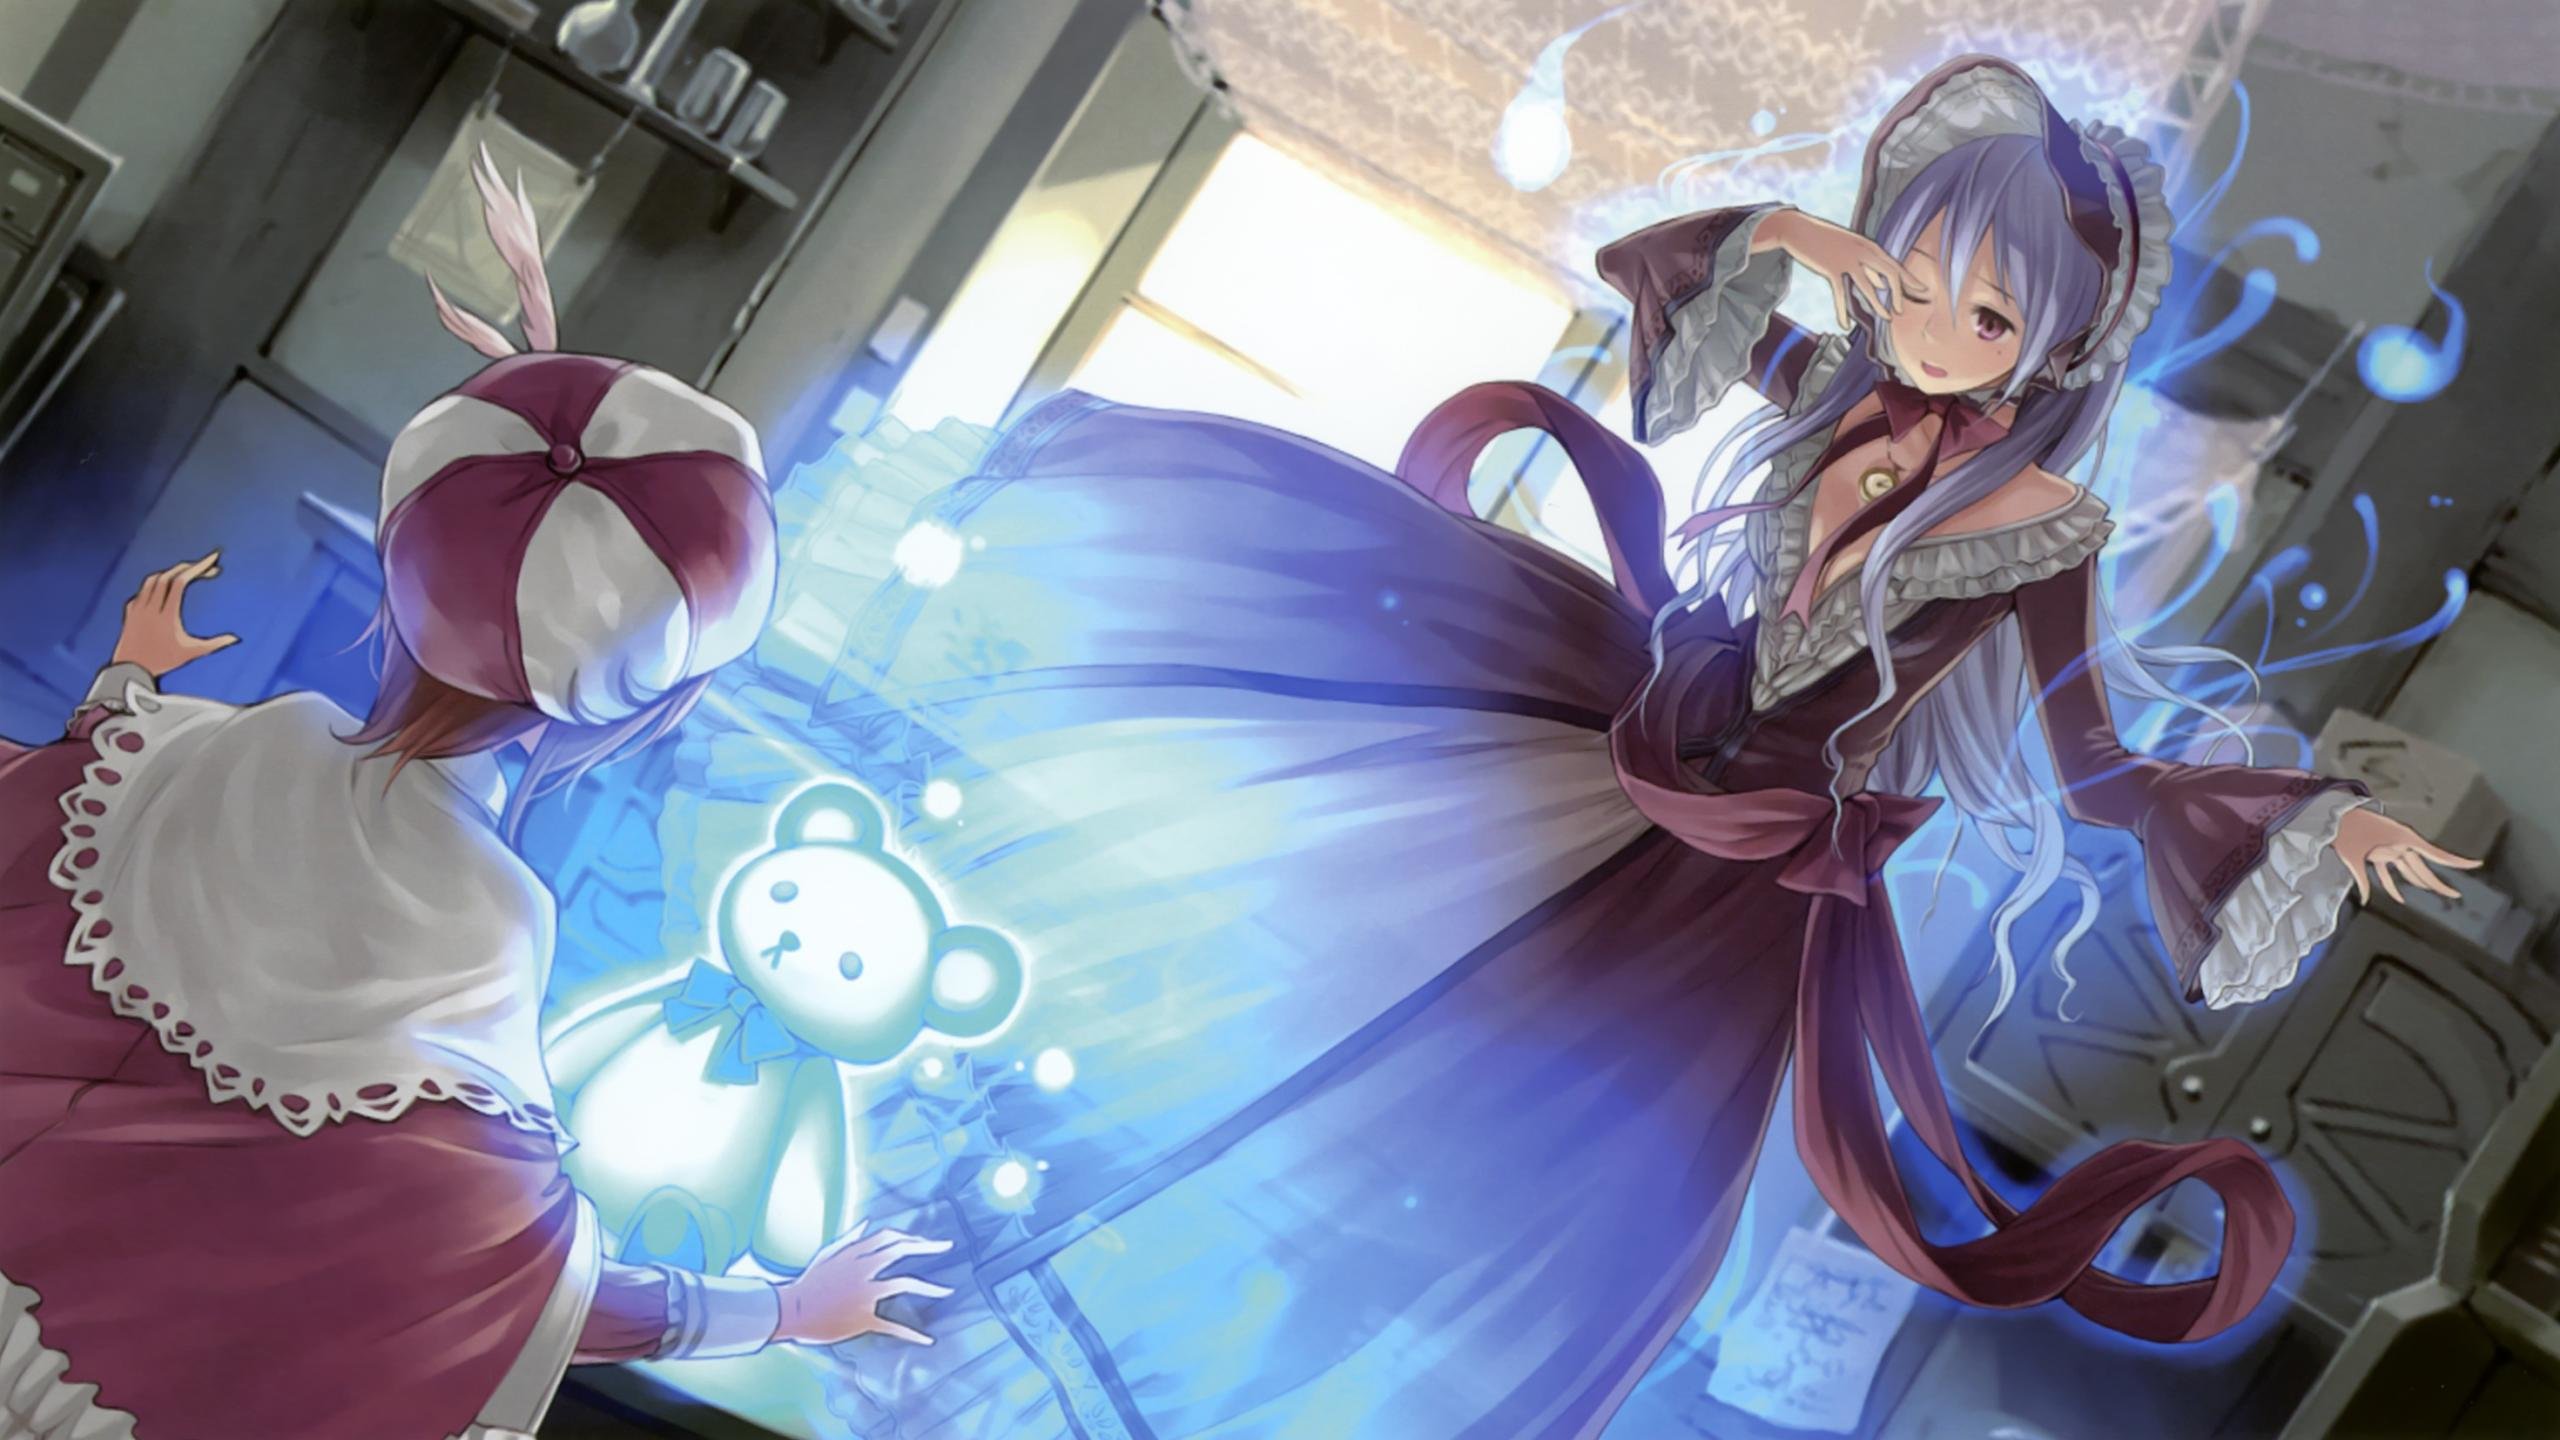 Download hd 2560x1440 Atelier Totori PC wallpaper ID:132403 for free